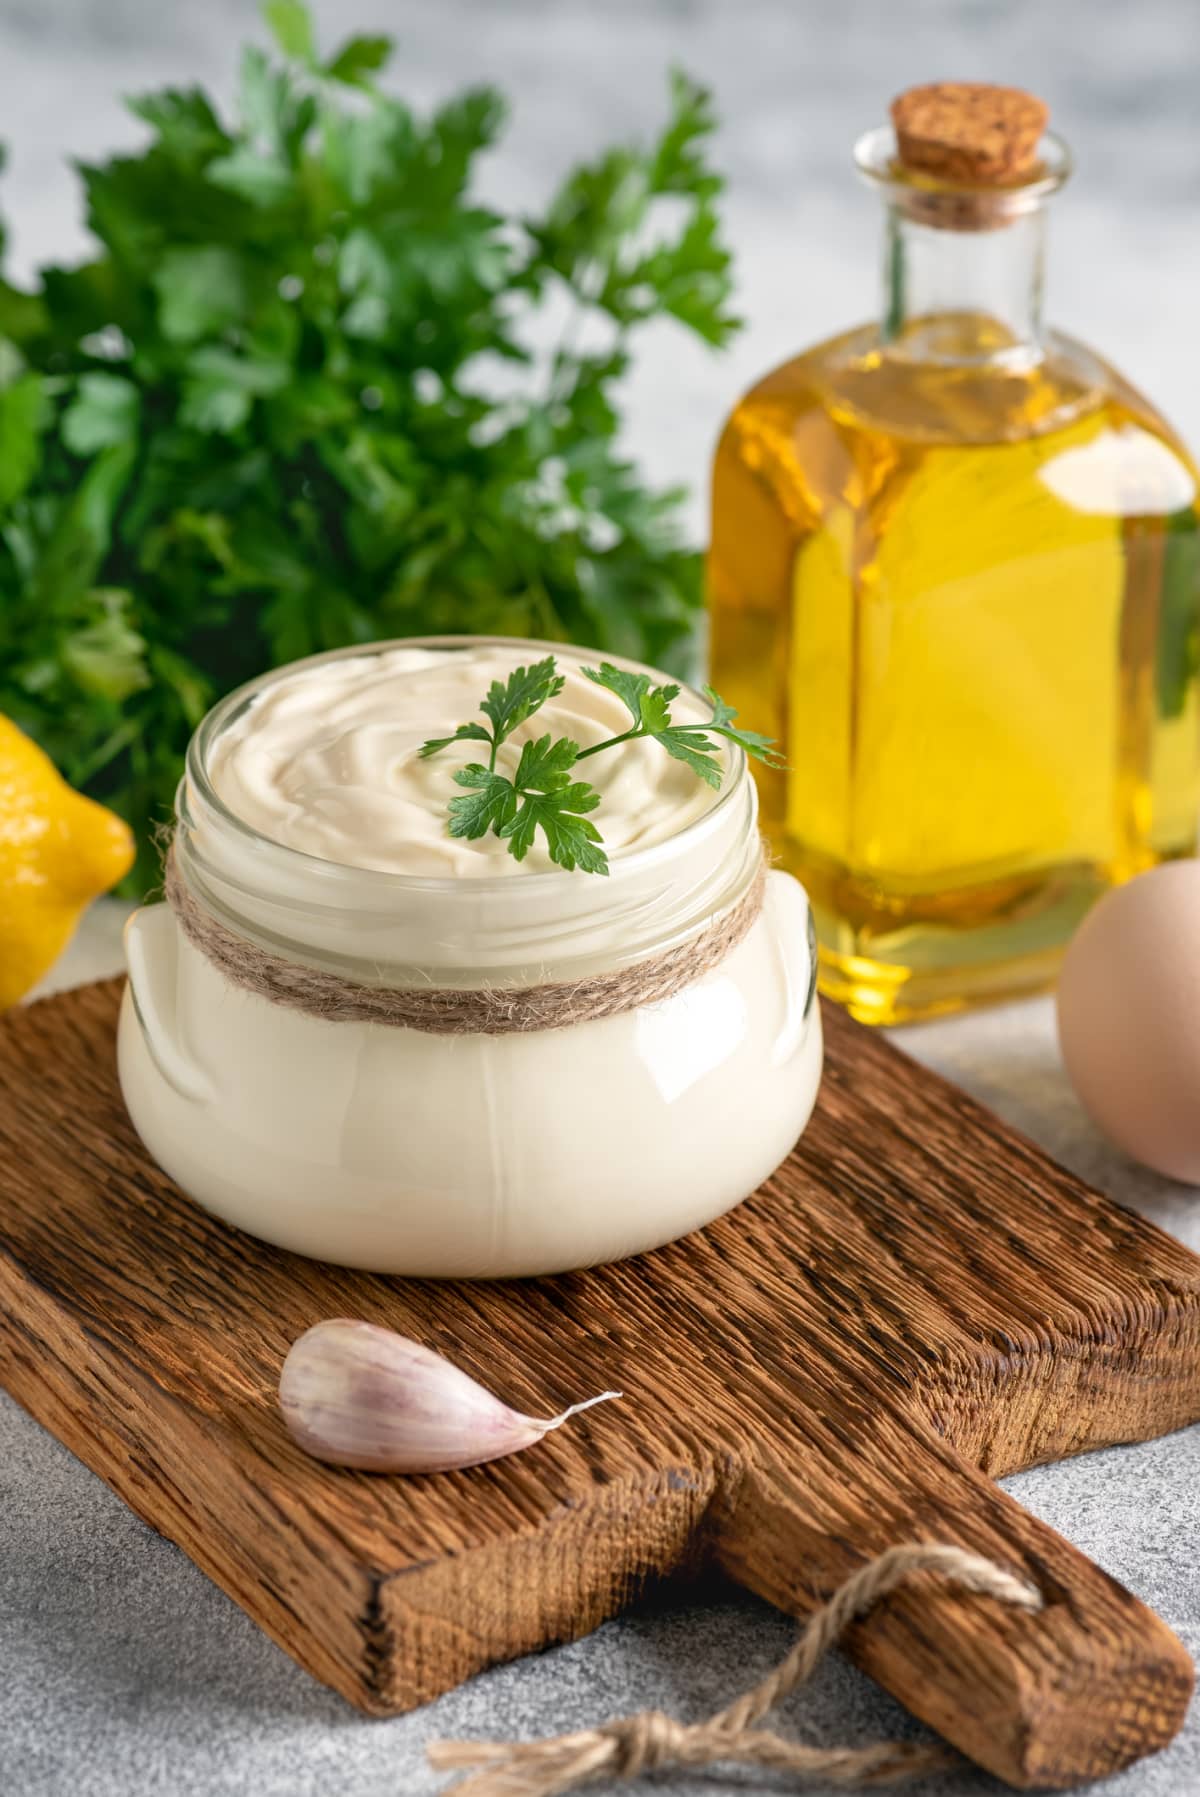 Jar of aioli on wooden platter with sprig of parsley